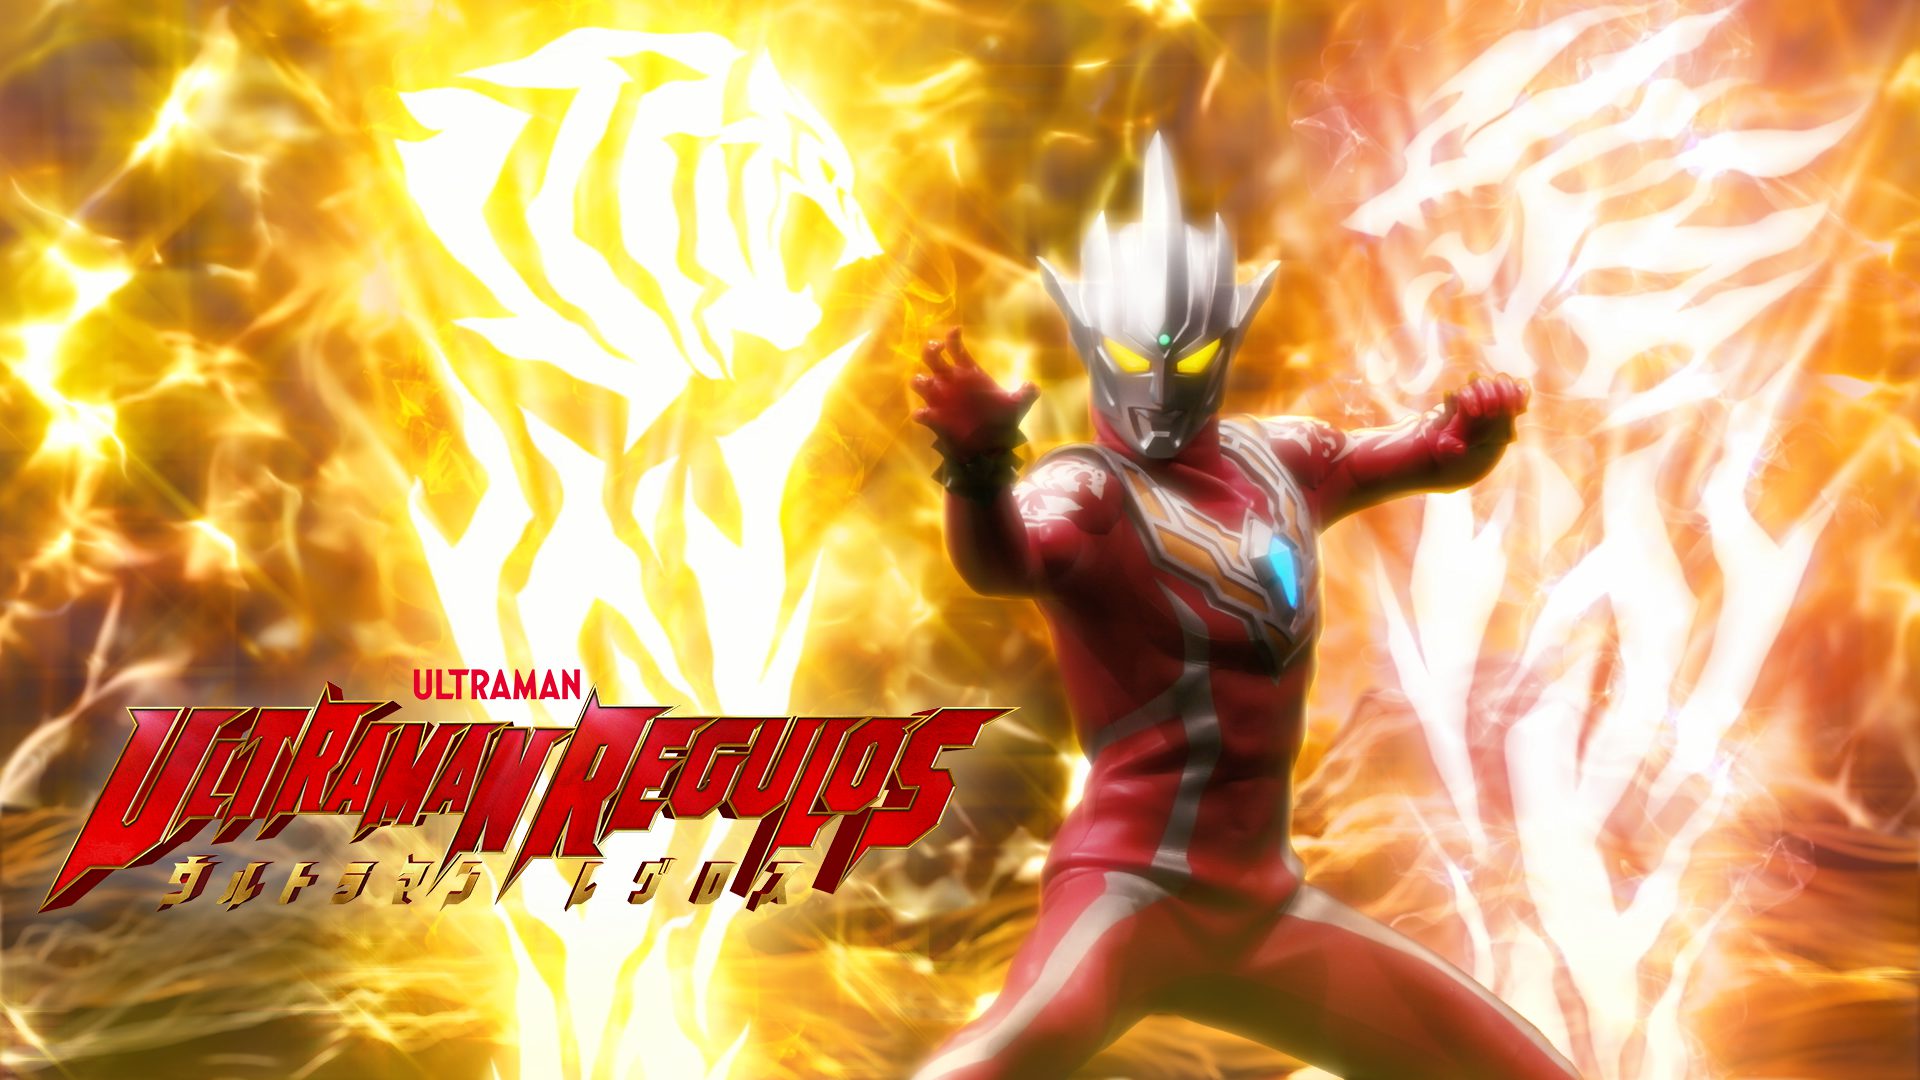 Spin-off Announced for Ultraman Regulos!